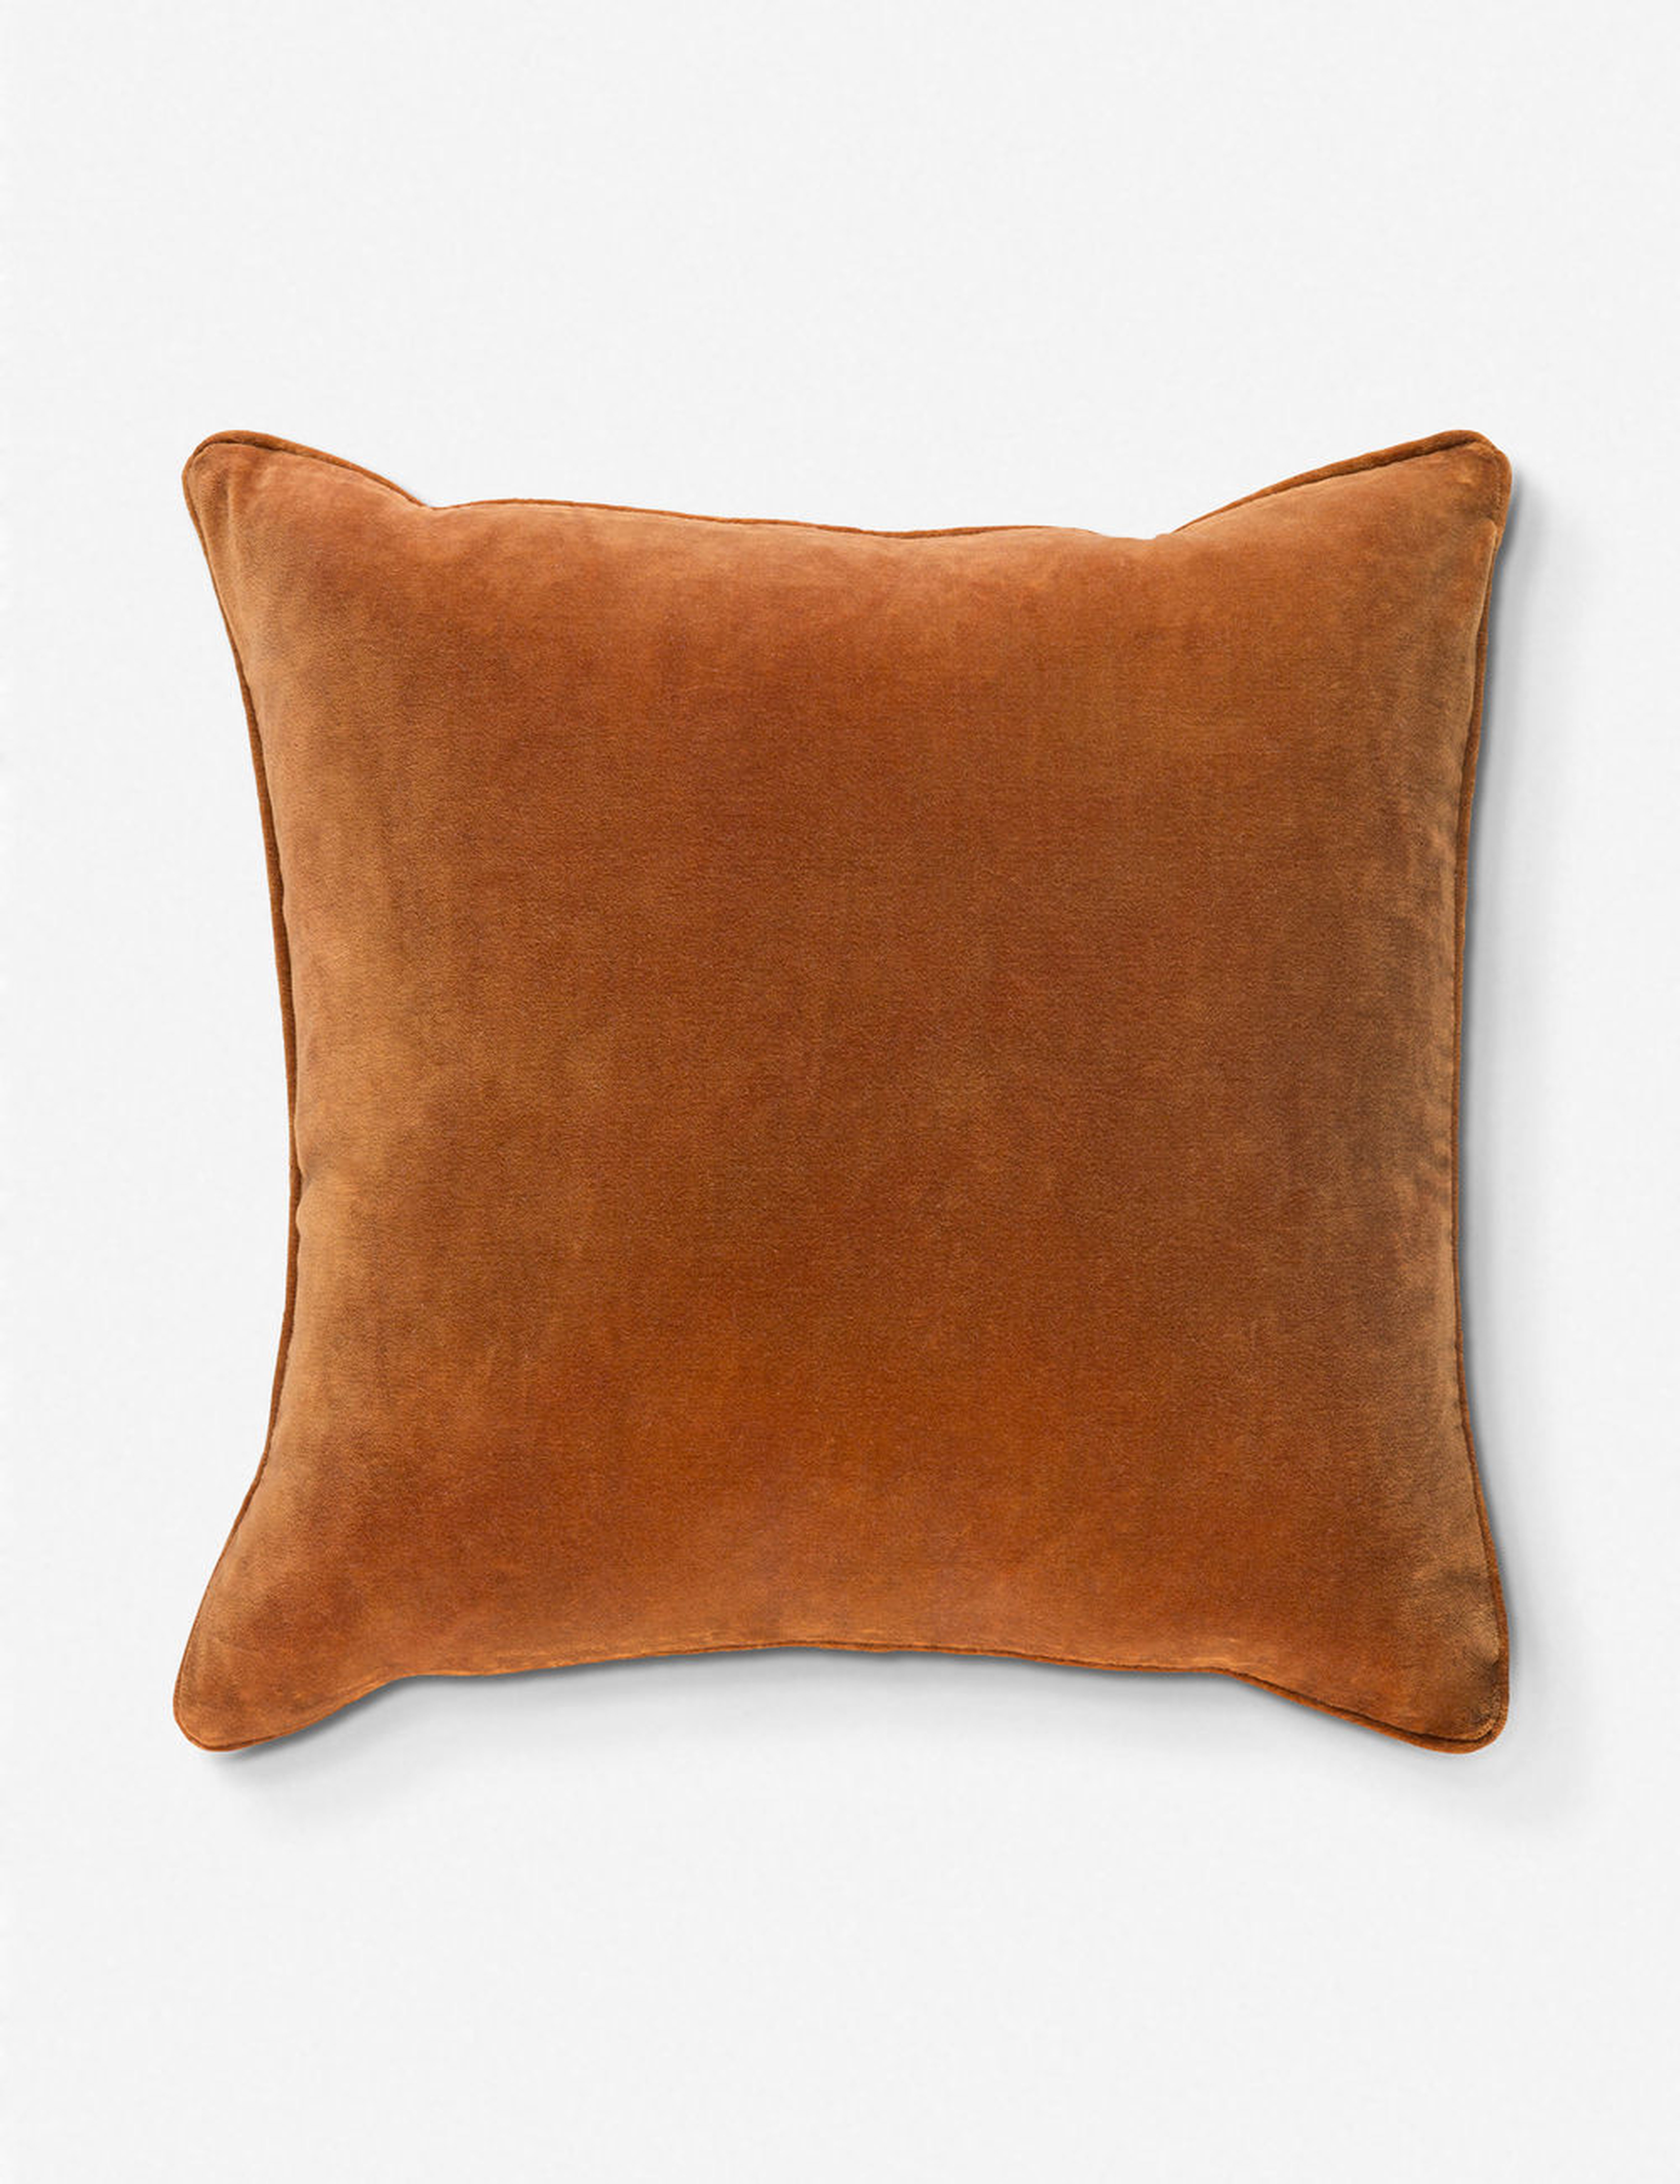 LIAM PILLOW, RUST With Polyester Insert - Lulu and Georgia